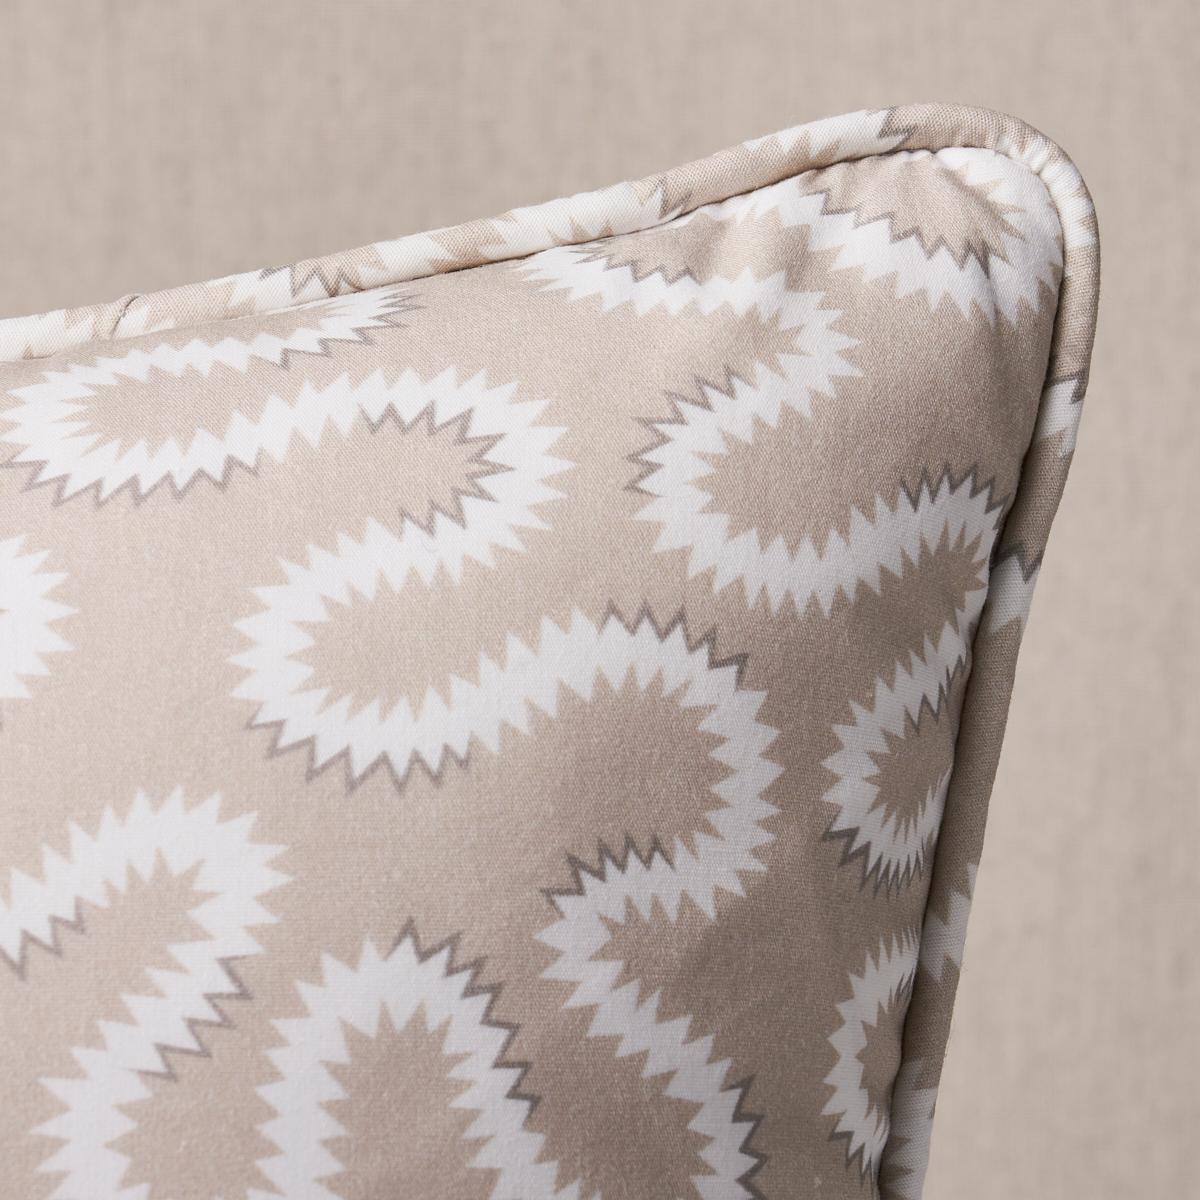 This pillow features Zoelie with a self welt finish. Inspired by a historic document print, Zoelie fabric in natural is a modern take on a traditional vermicelli motif. Pillow includes a feather/down fill insert and hidden zipper closure.

*If out